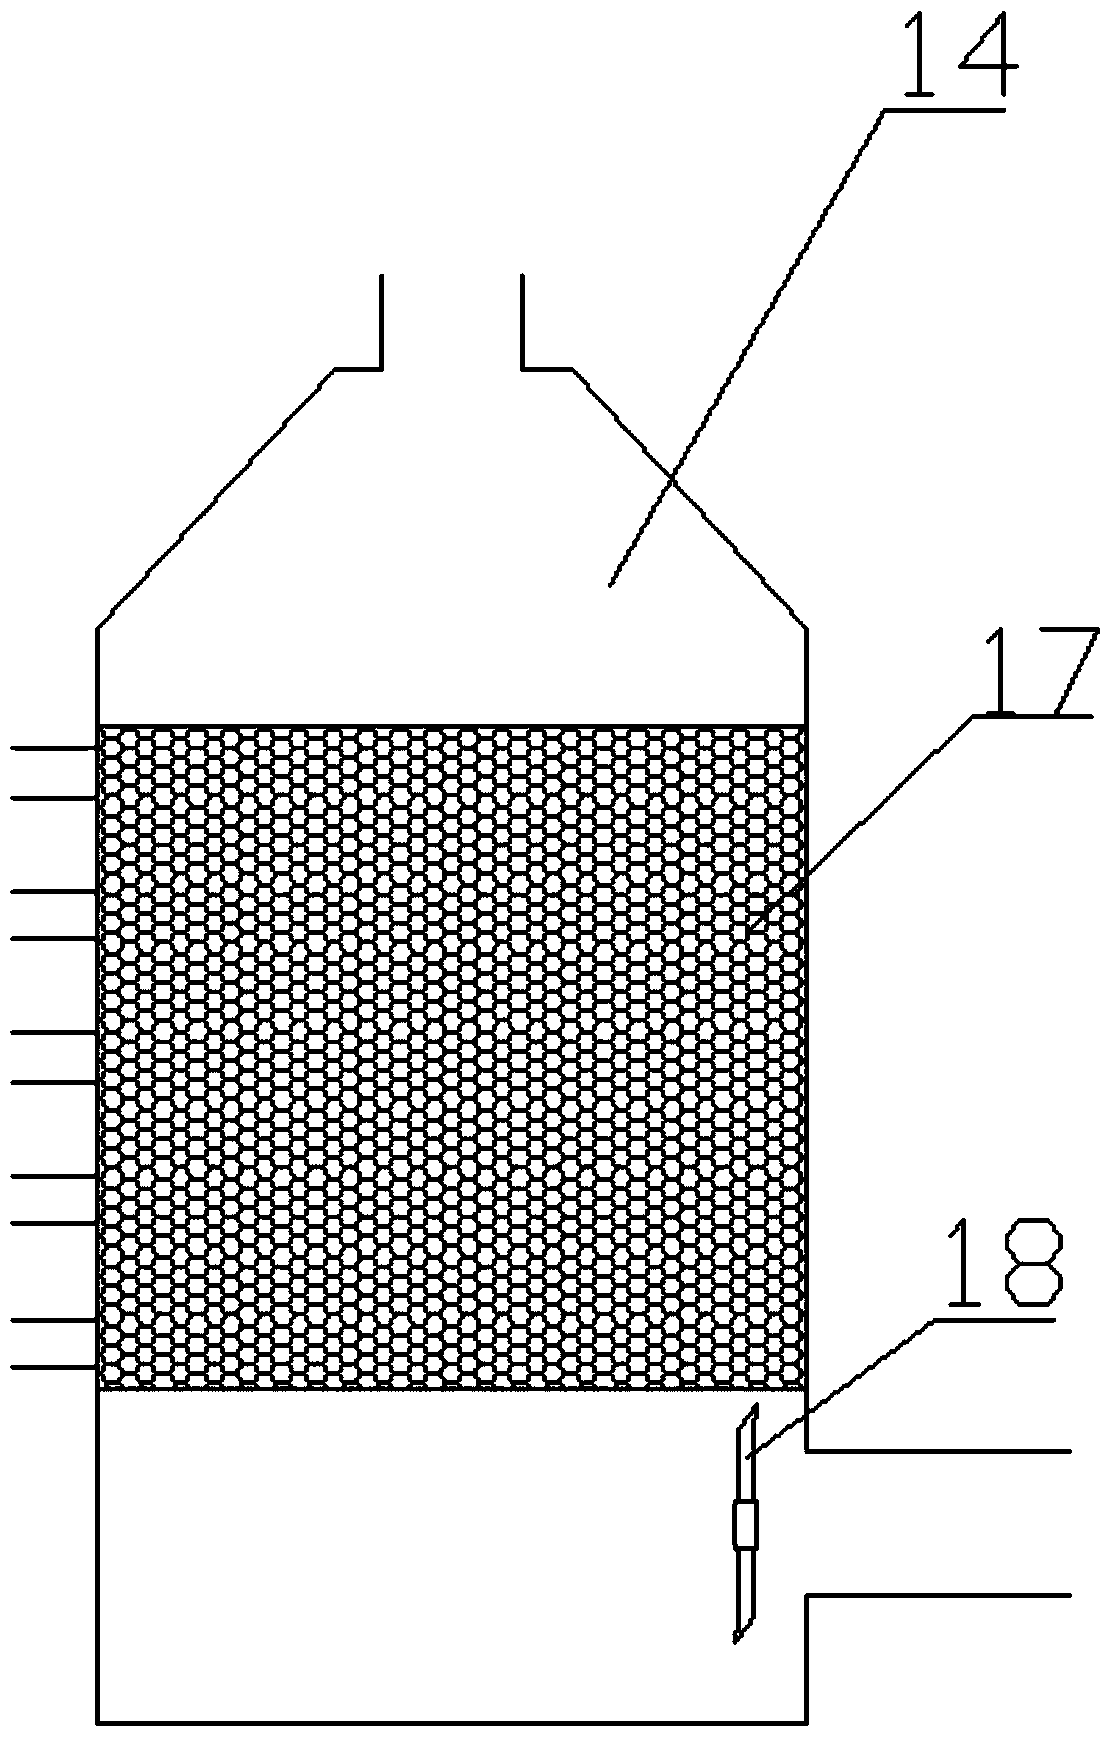 A waste gas collection and treatment device with detection function